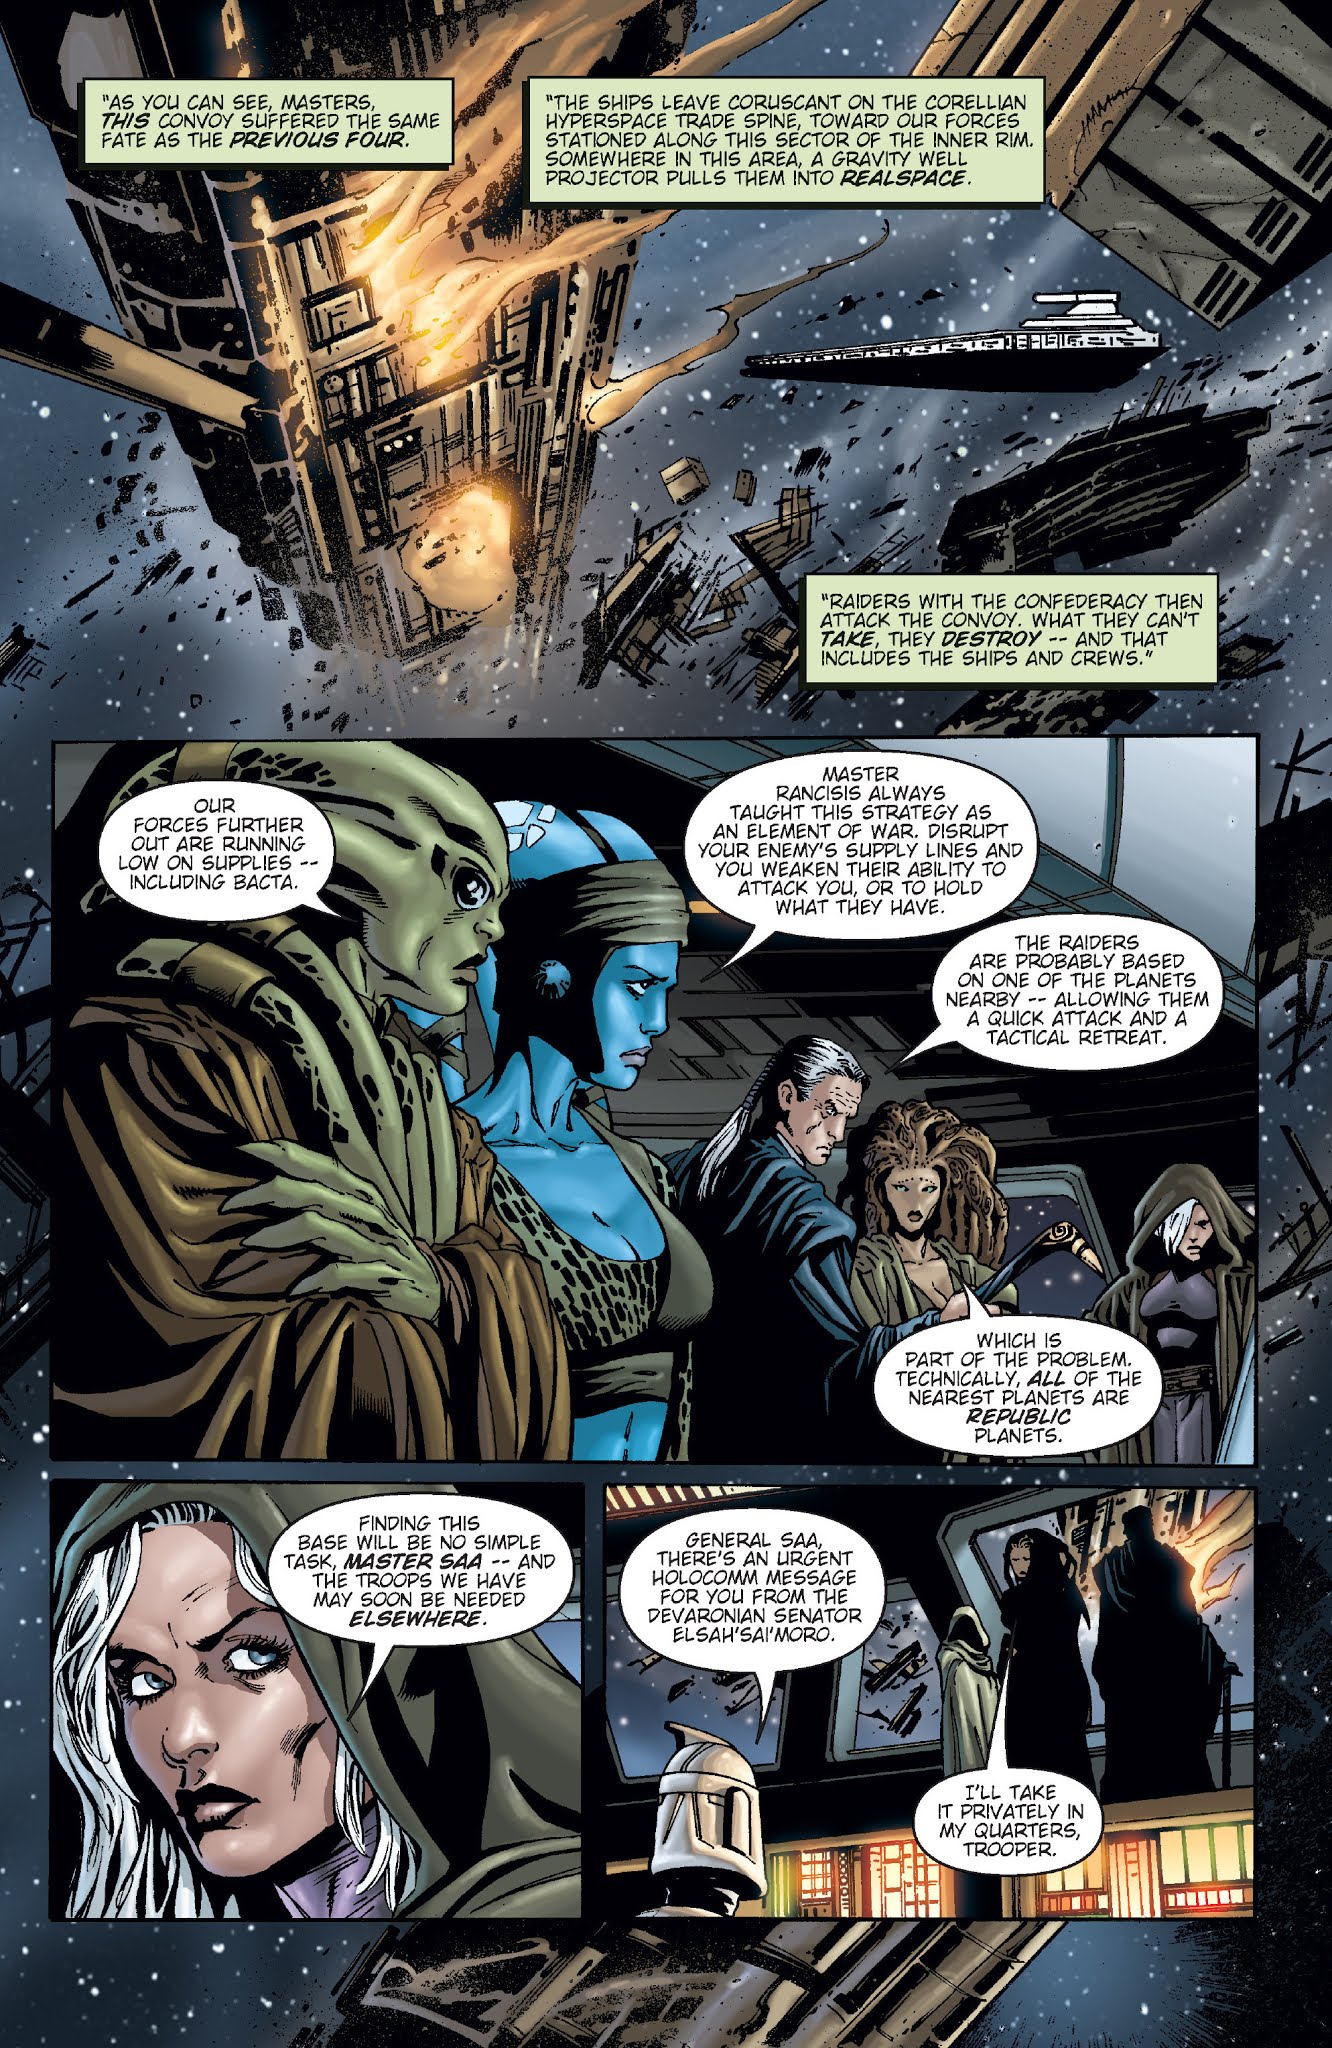 Read online Star Wars: Jedi comic -  Issue # Issue Aayla Secura - 5